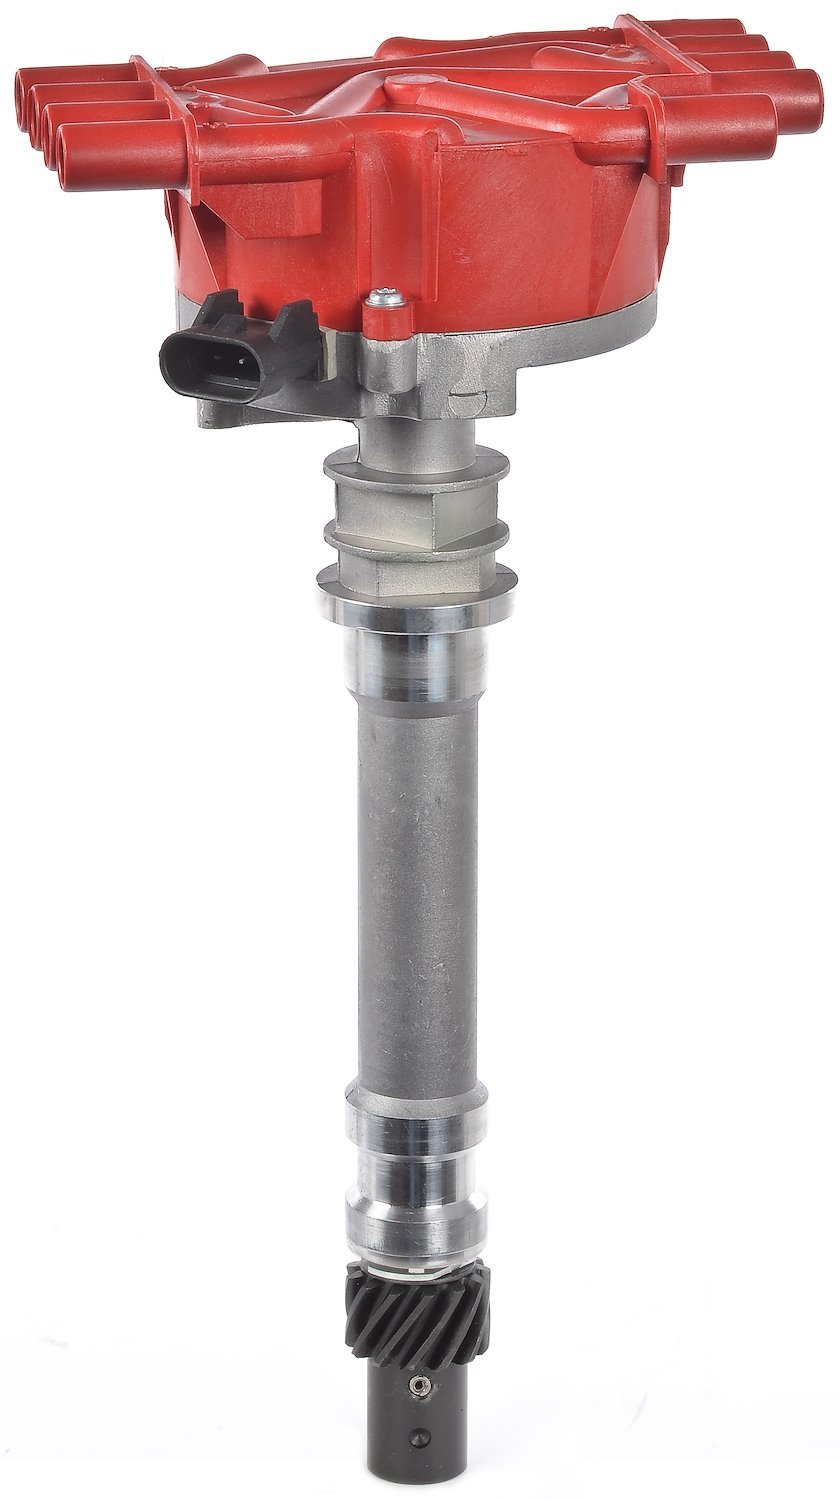 Vortec Street Spark Distributor for 1996-2000 Chevy 5.7L Small Block Engine